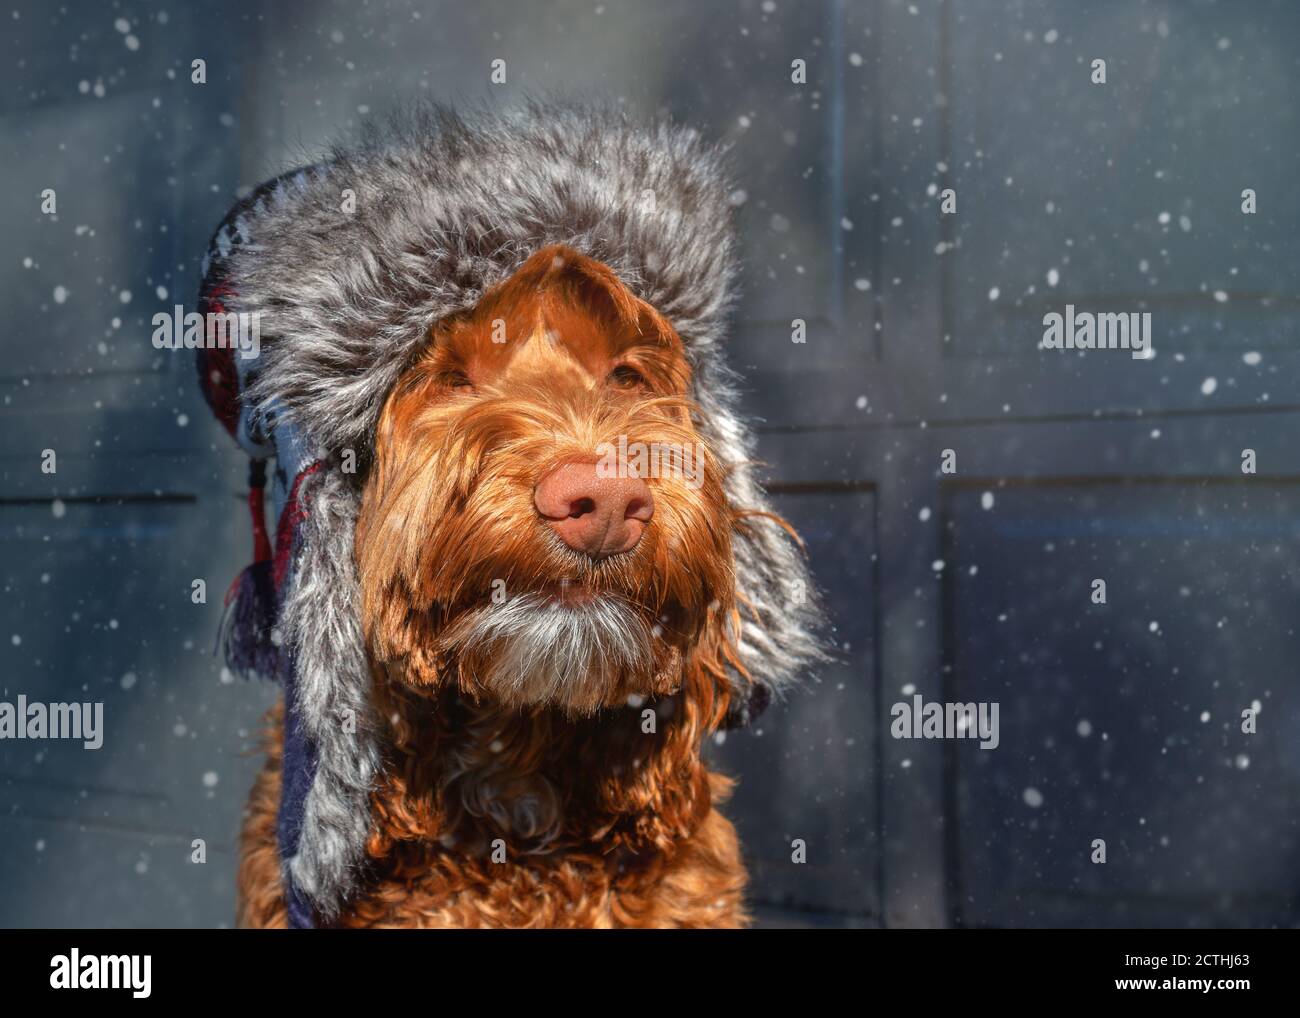 Fluffy dog in snow storm. The brown  Labradoodle is wearing a faux fur aviator hat. Dog portrait. Soft light and snow flakes. Stock Photo